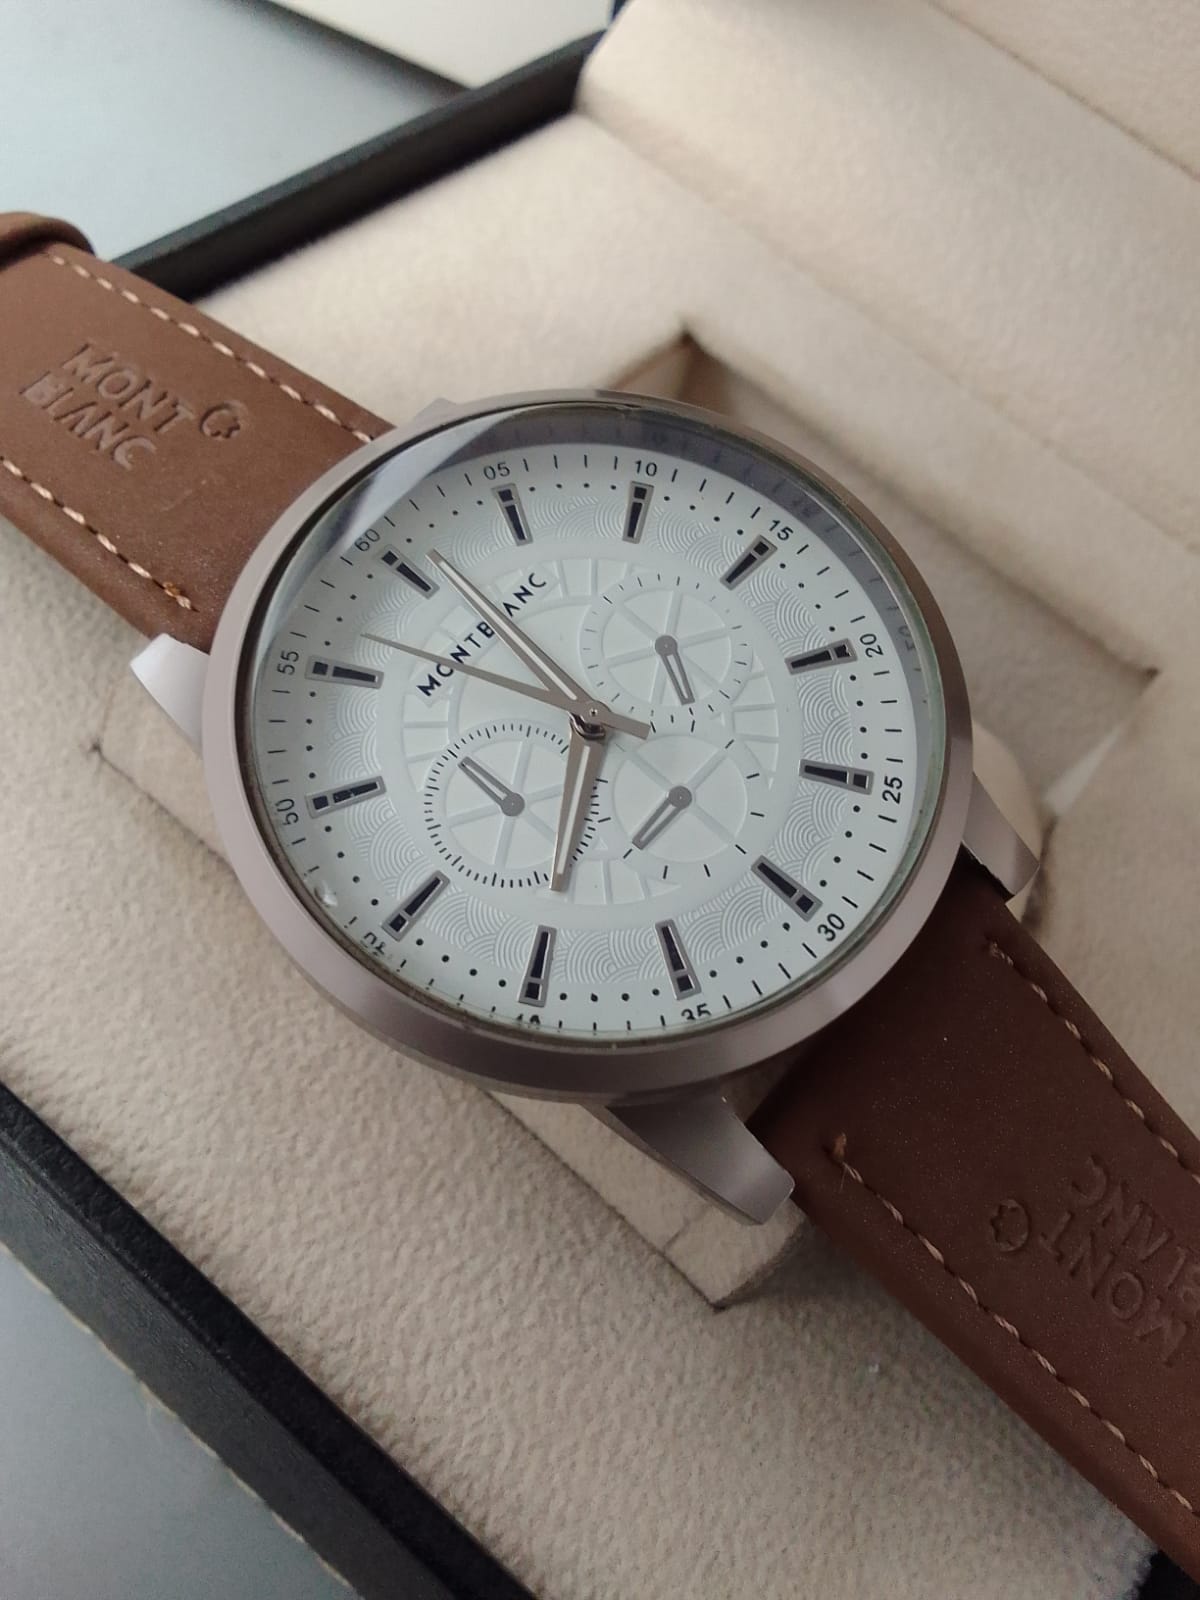 Smart face classic casual watch for men.